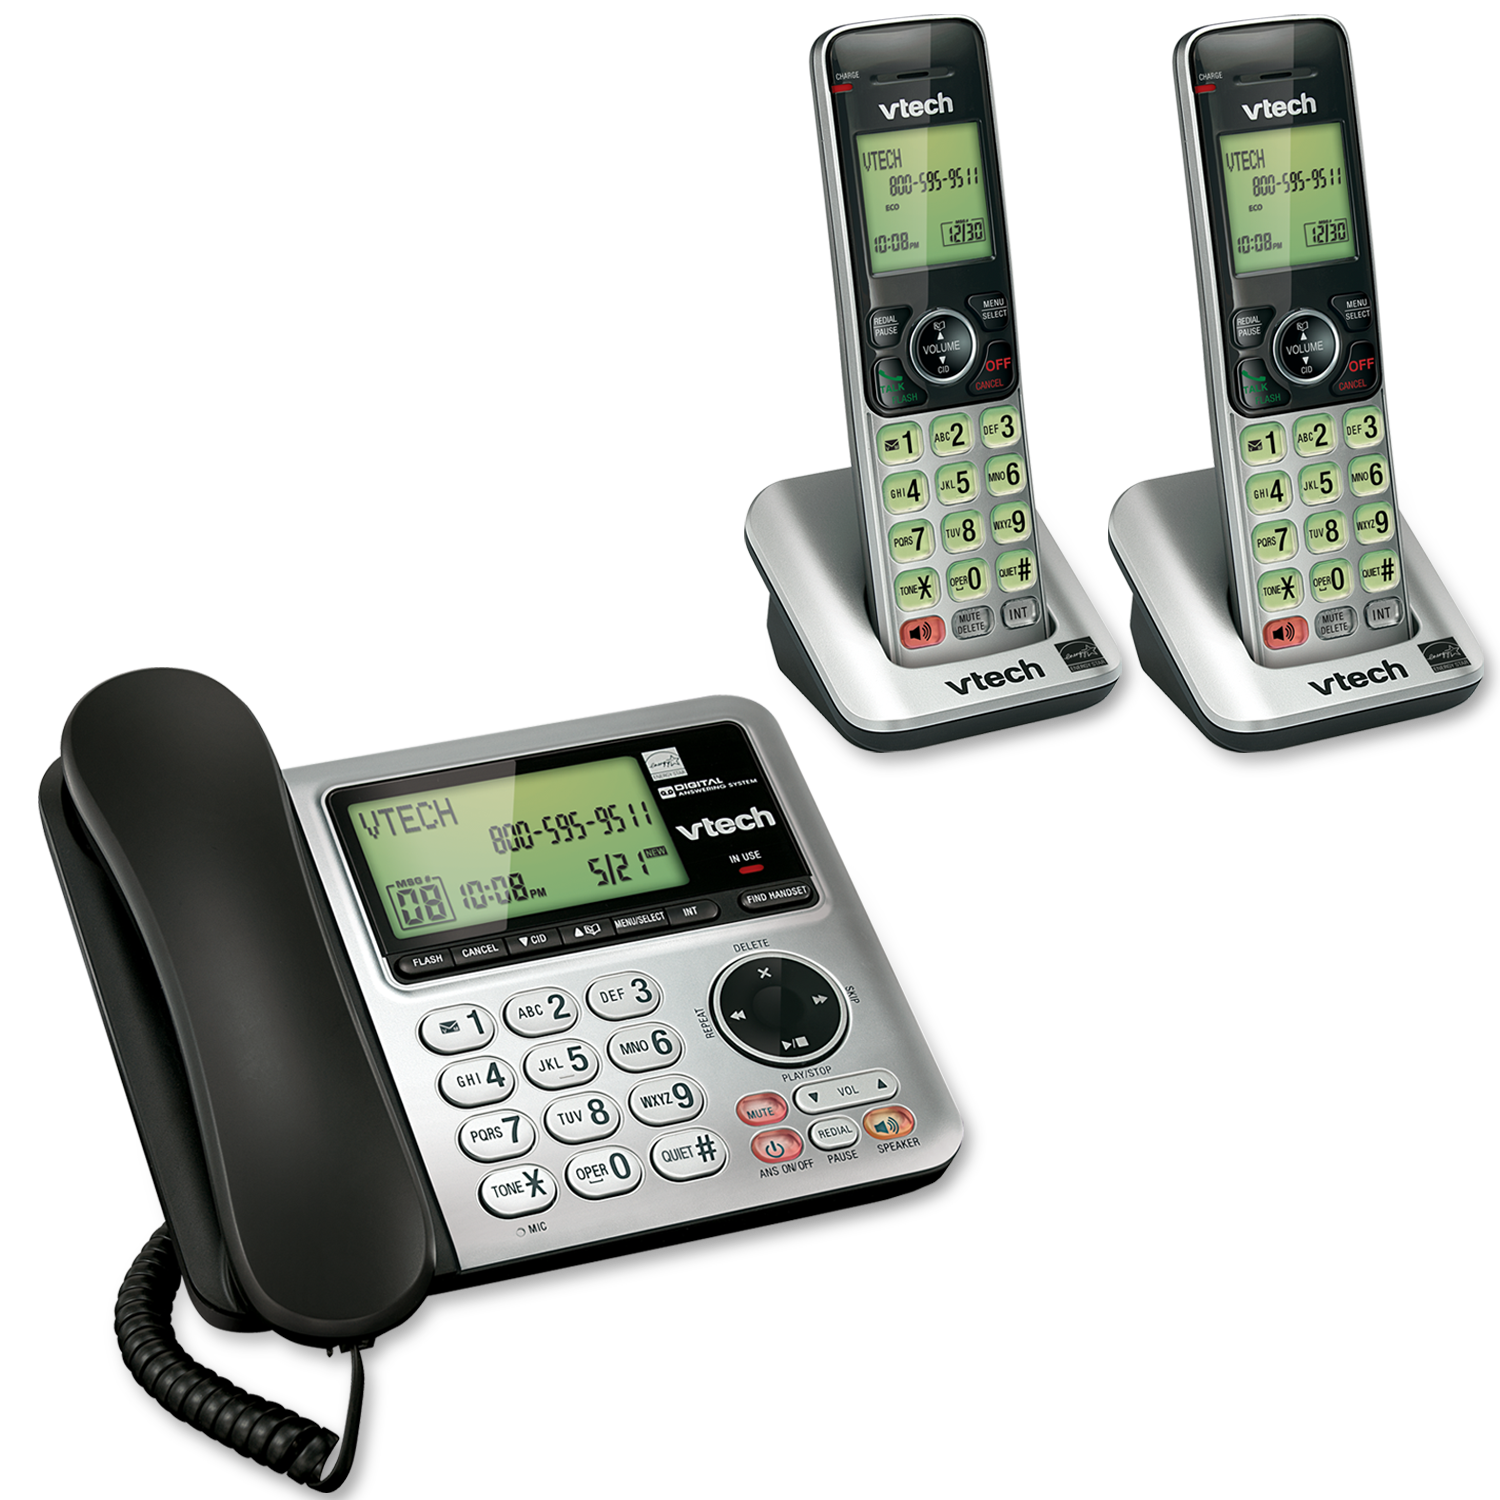 3 Handset Answering System with Caller ID/Call Waiting - view 2